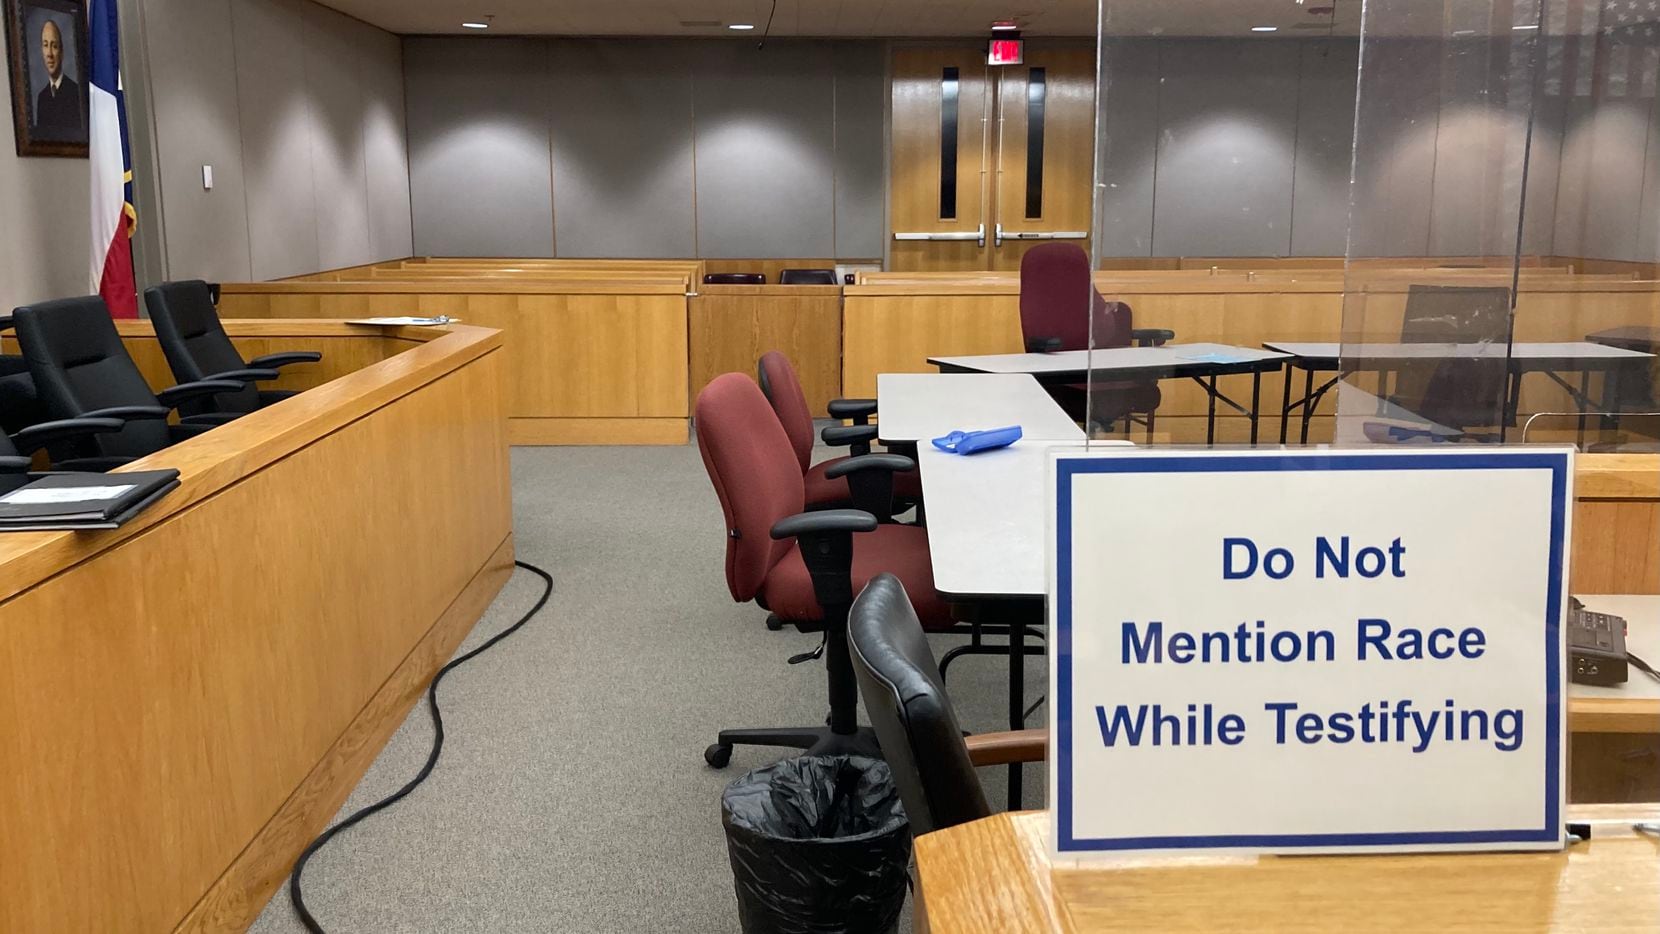 A sign prohibiting discussions of race is posted inside grand jury room witness boxes.